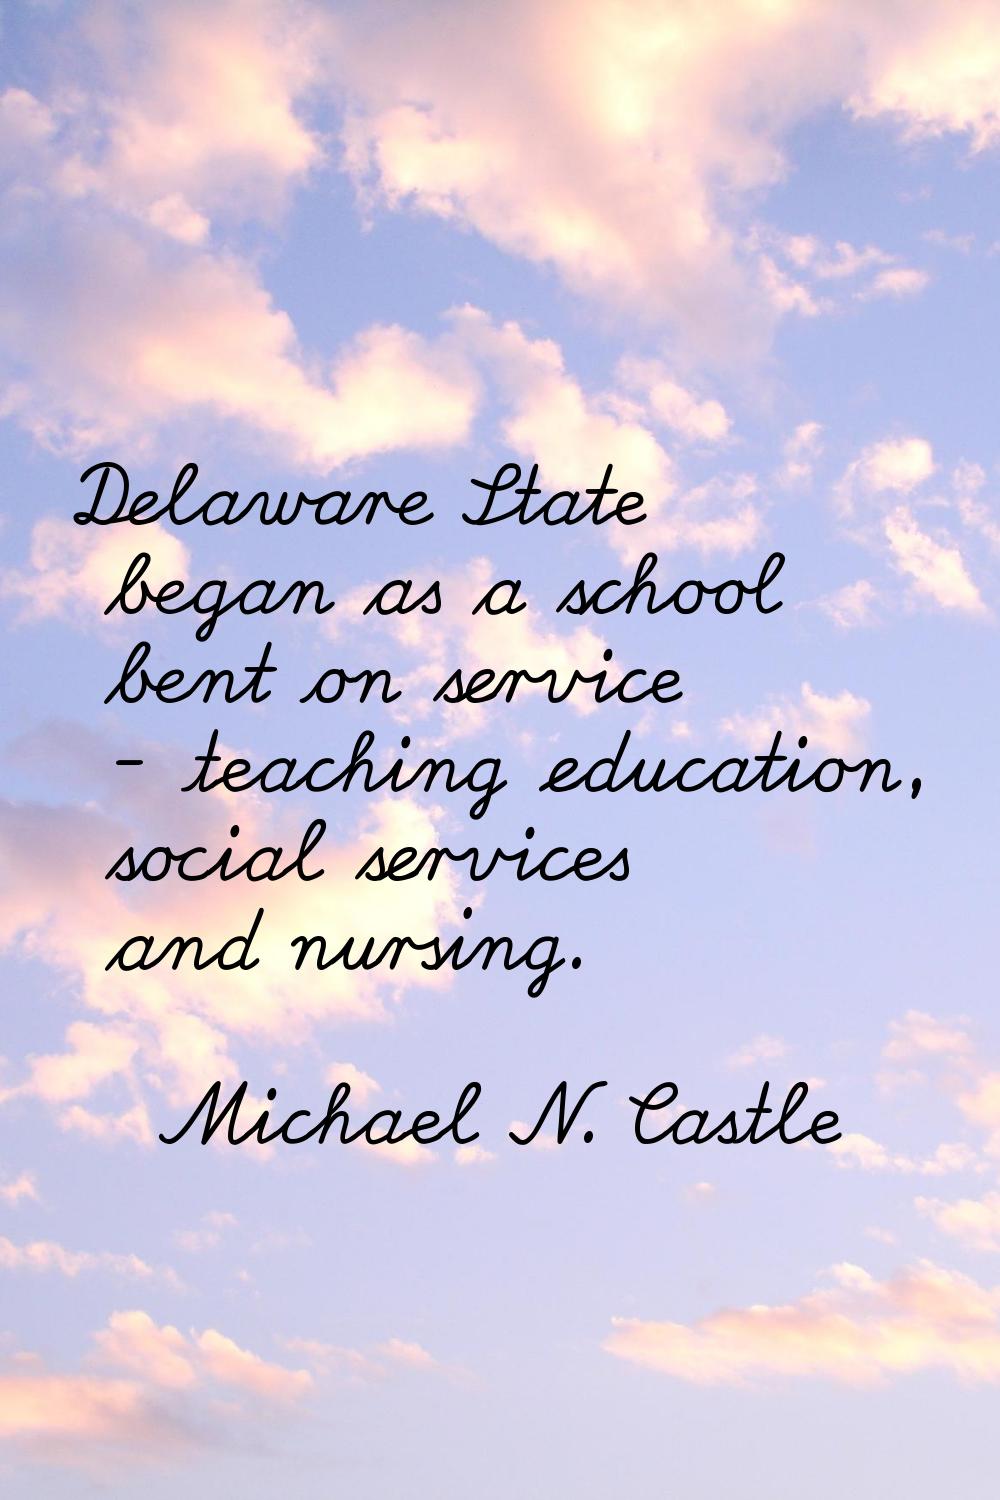 Delaware State began as a school bent on service - teaching education, social services and nursing.